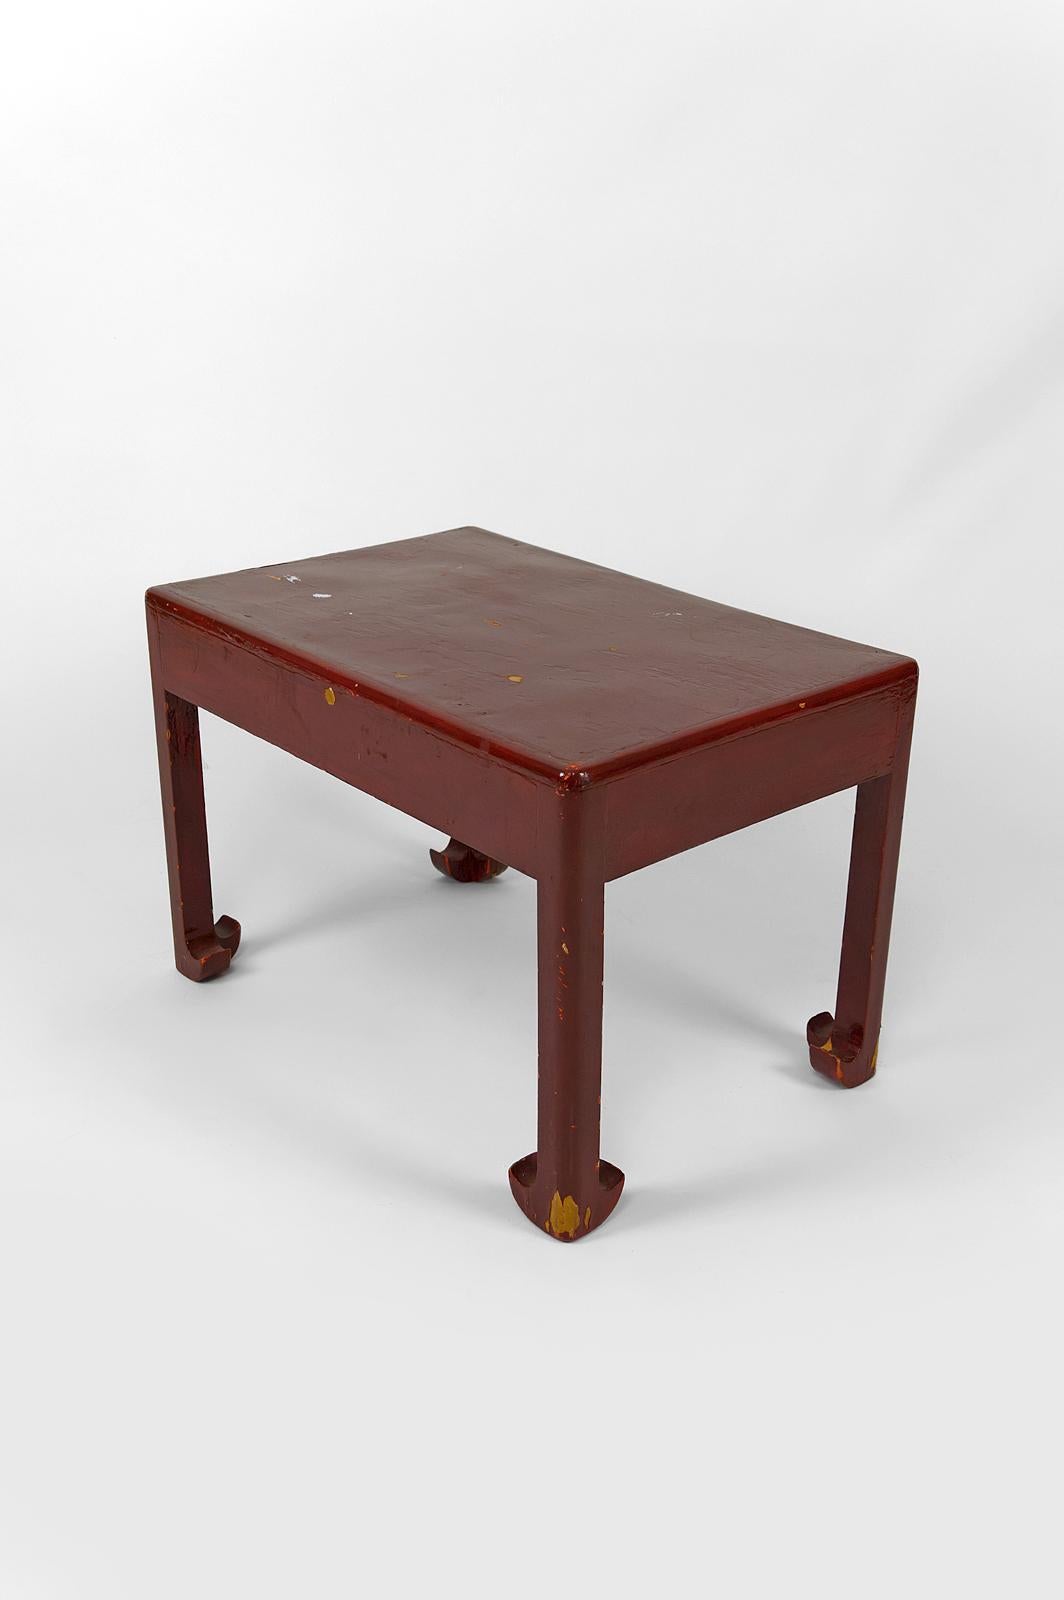 Early 20th Century Lacquered coffee table / end table by Paul Poiret for Atelier Martine, France